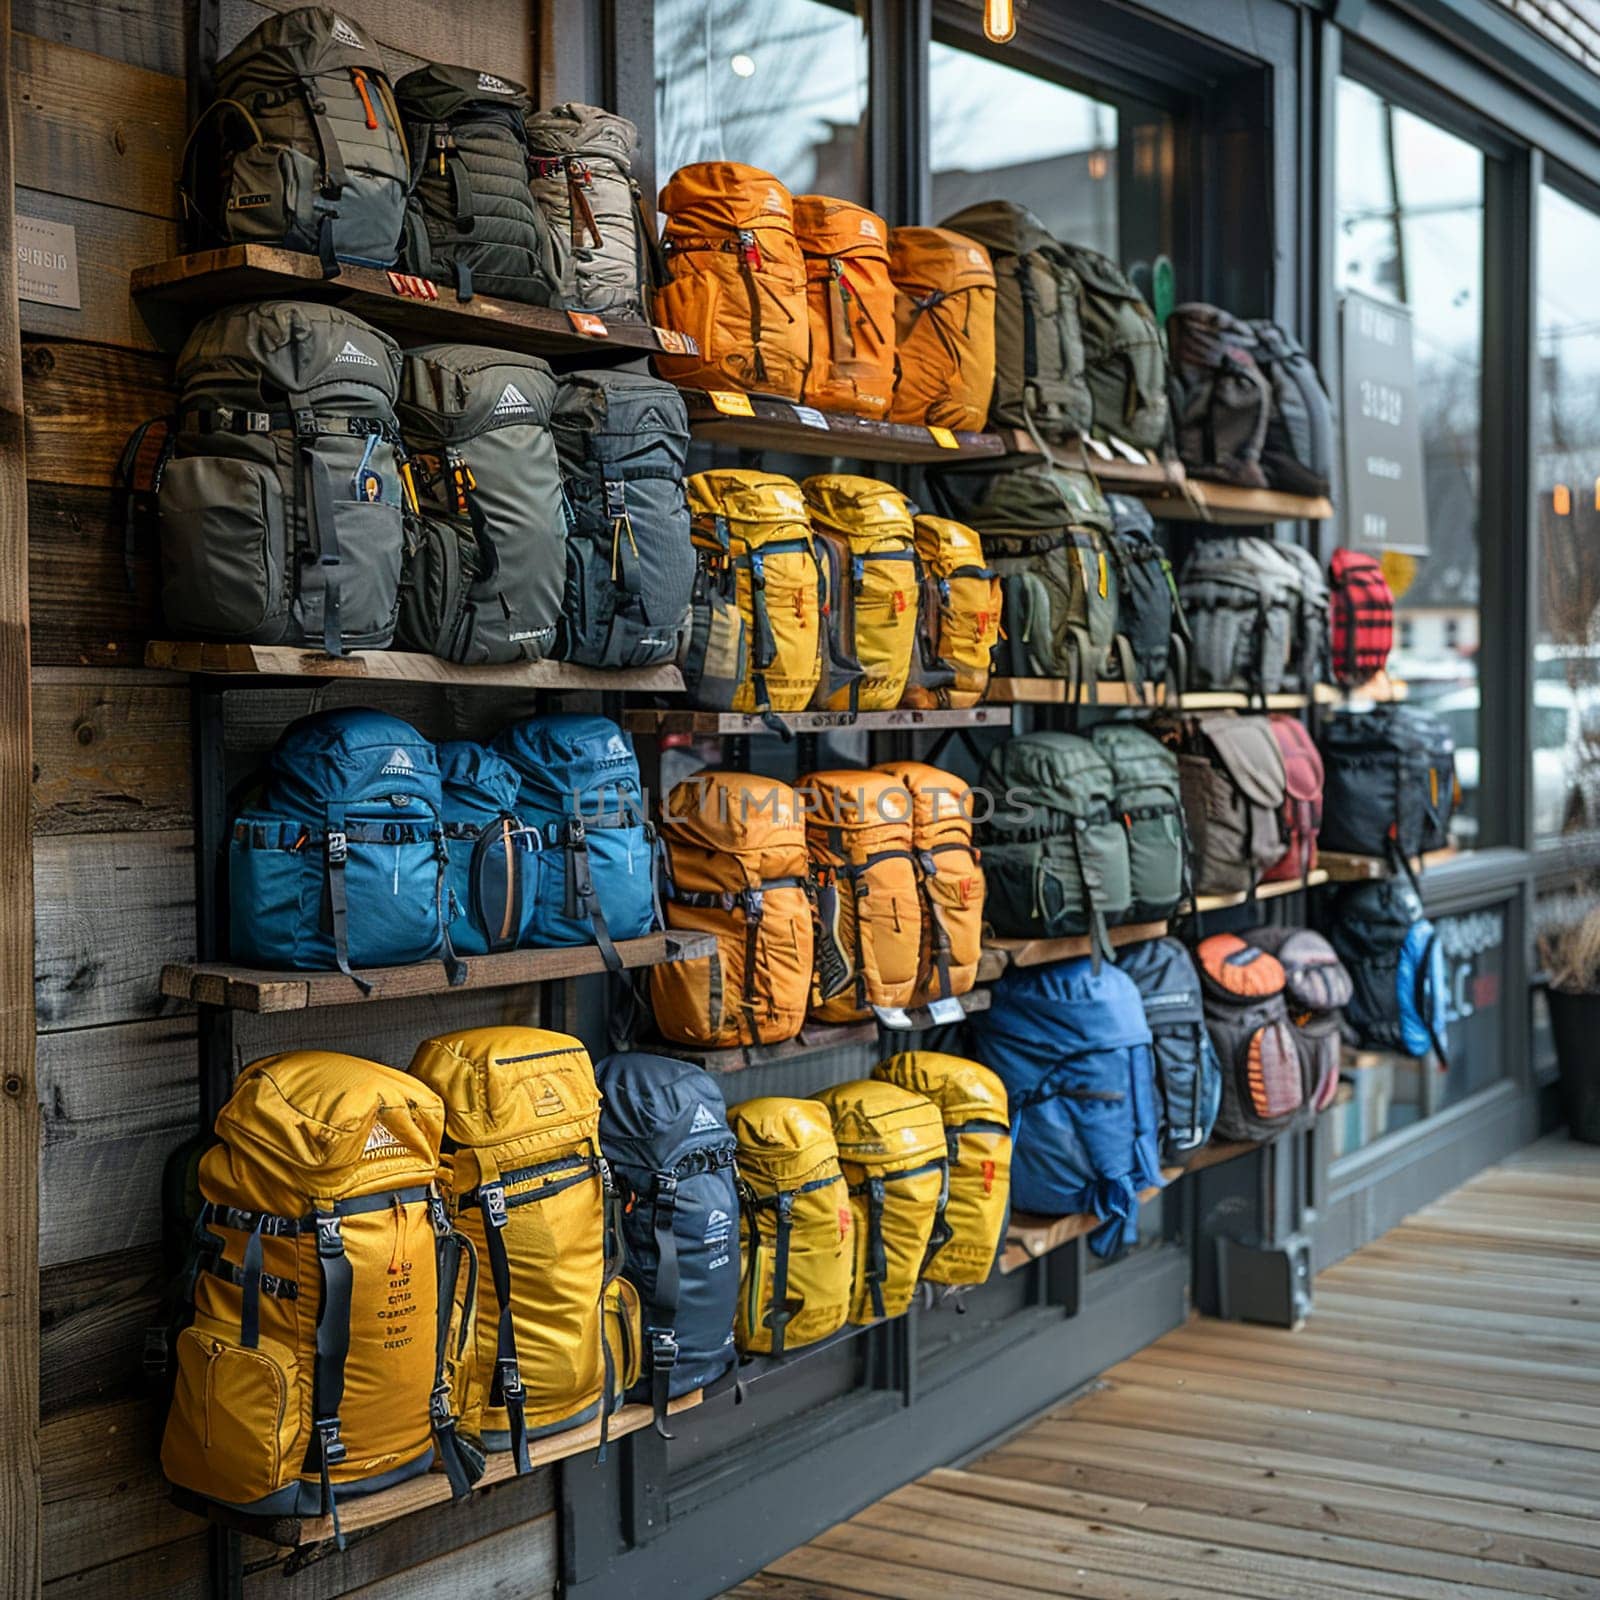 Outdoor Gear Displays Equip Exploration in Business of Adventure Retail by Benzoix